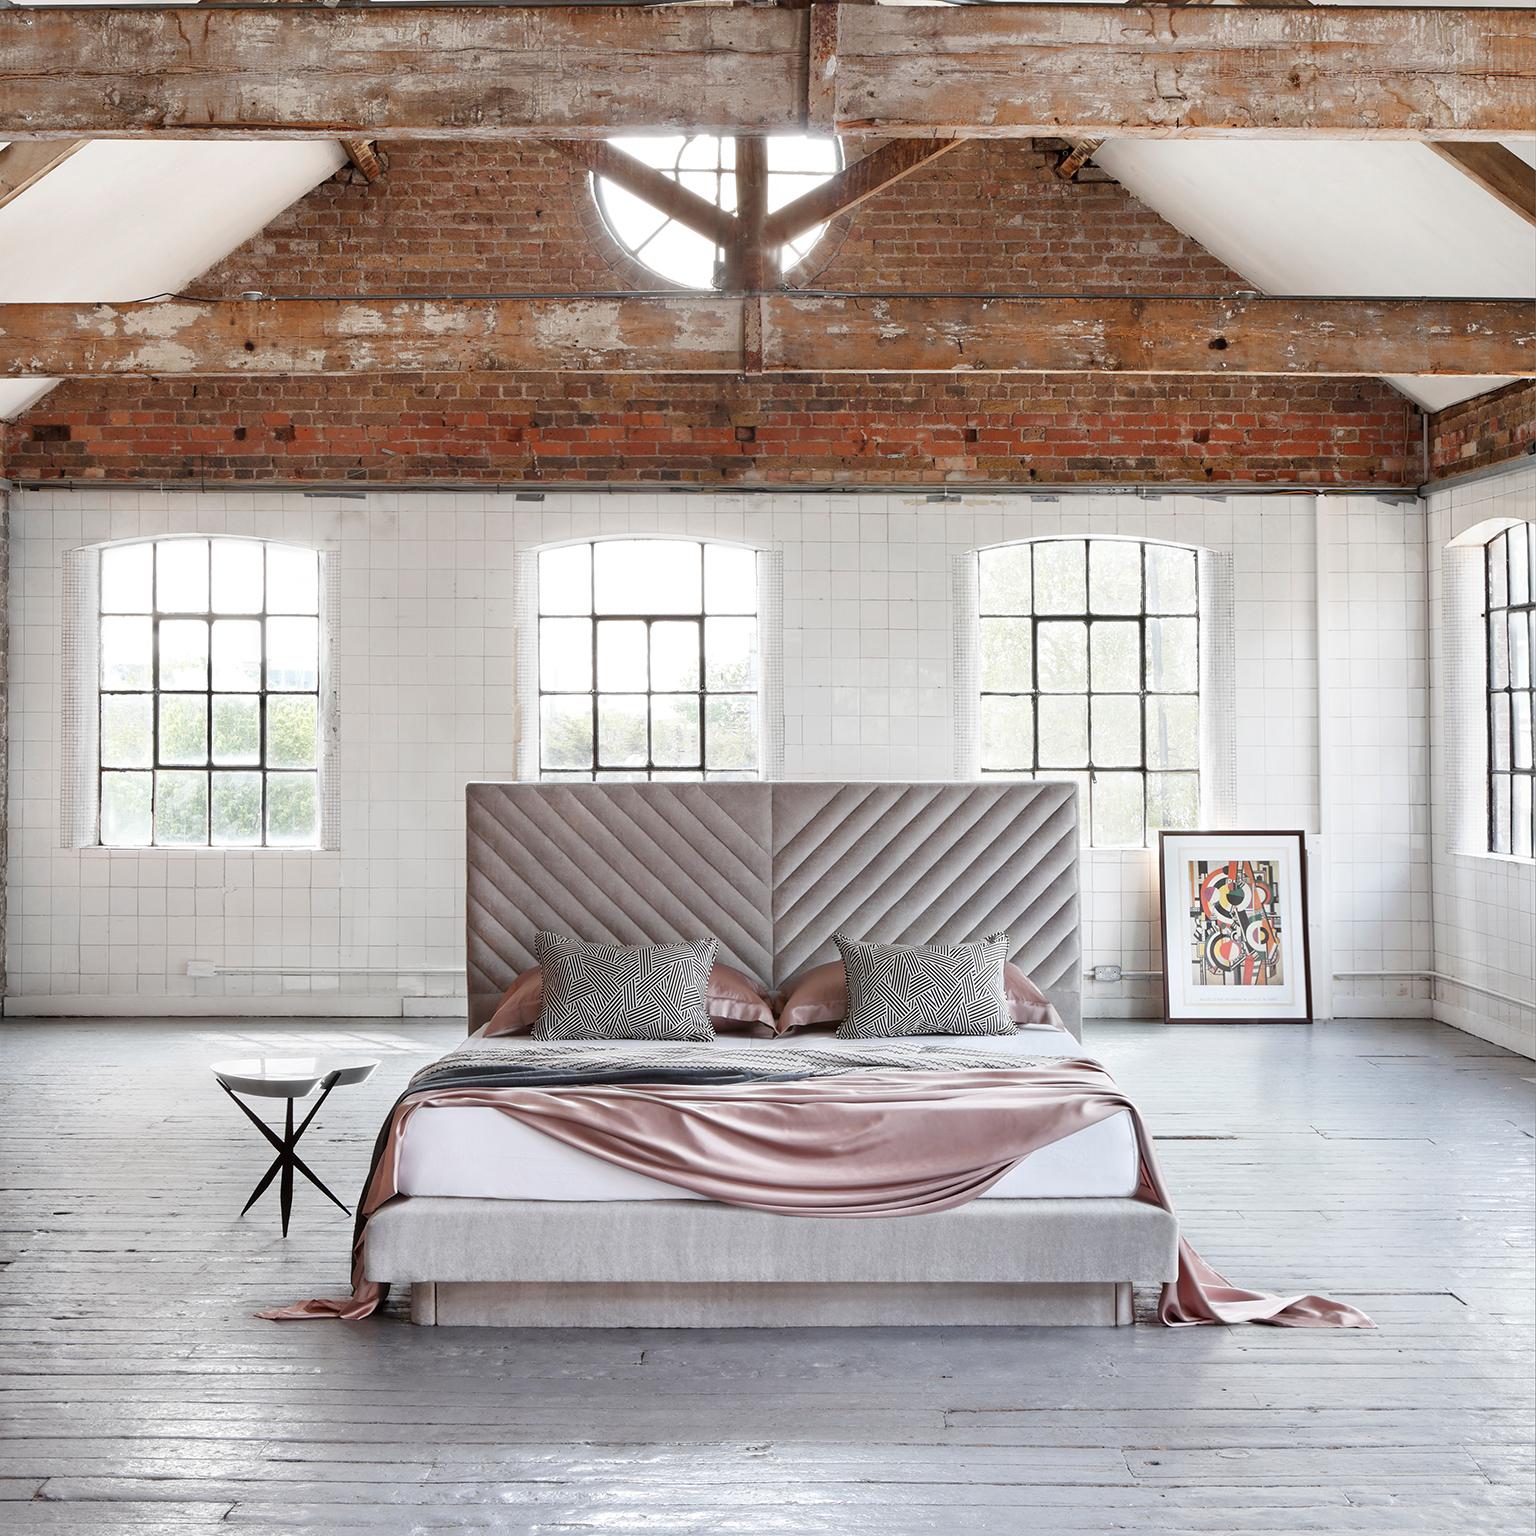 Conceived by award-winning New York interior designer, Nicole Fuller, the Stella bed exudes sophistication and comfort. Inspired by the work of Italian-American painter and sculptor, Frank Stella, Fuller combines artful geometry with a luxurious